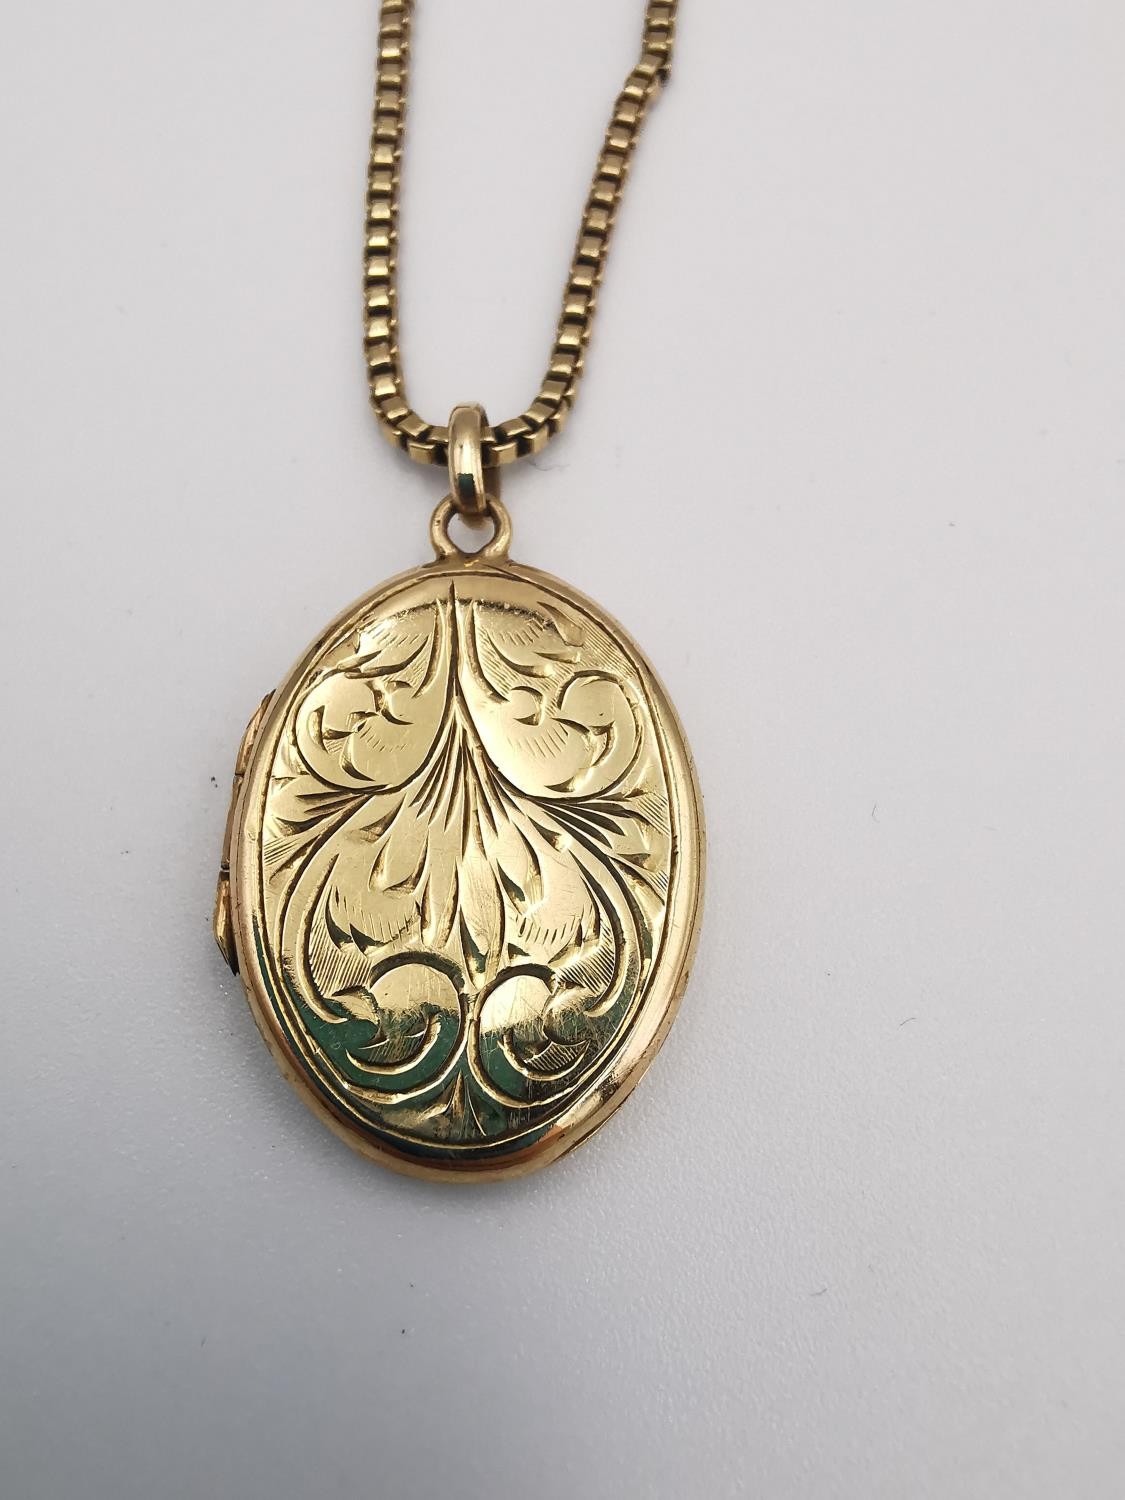 A 9ct yellow box chain and 9ct yellow gold engraved oval locket. The oval locket with a stylised